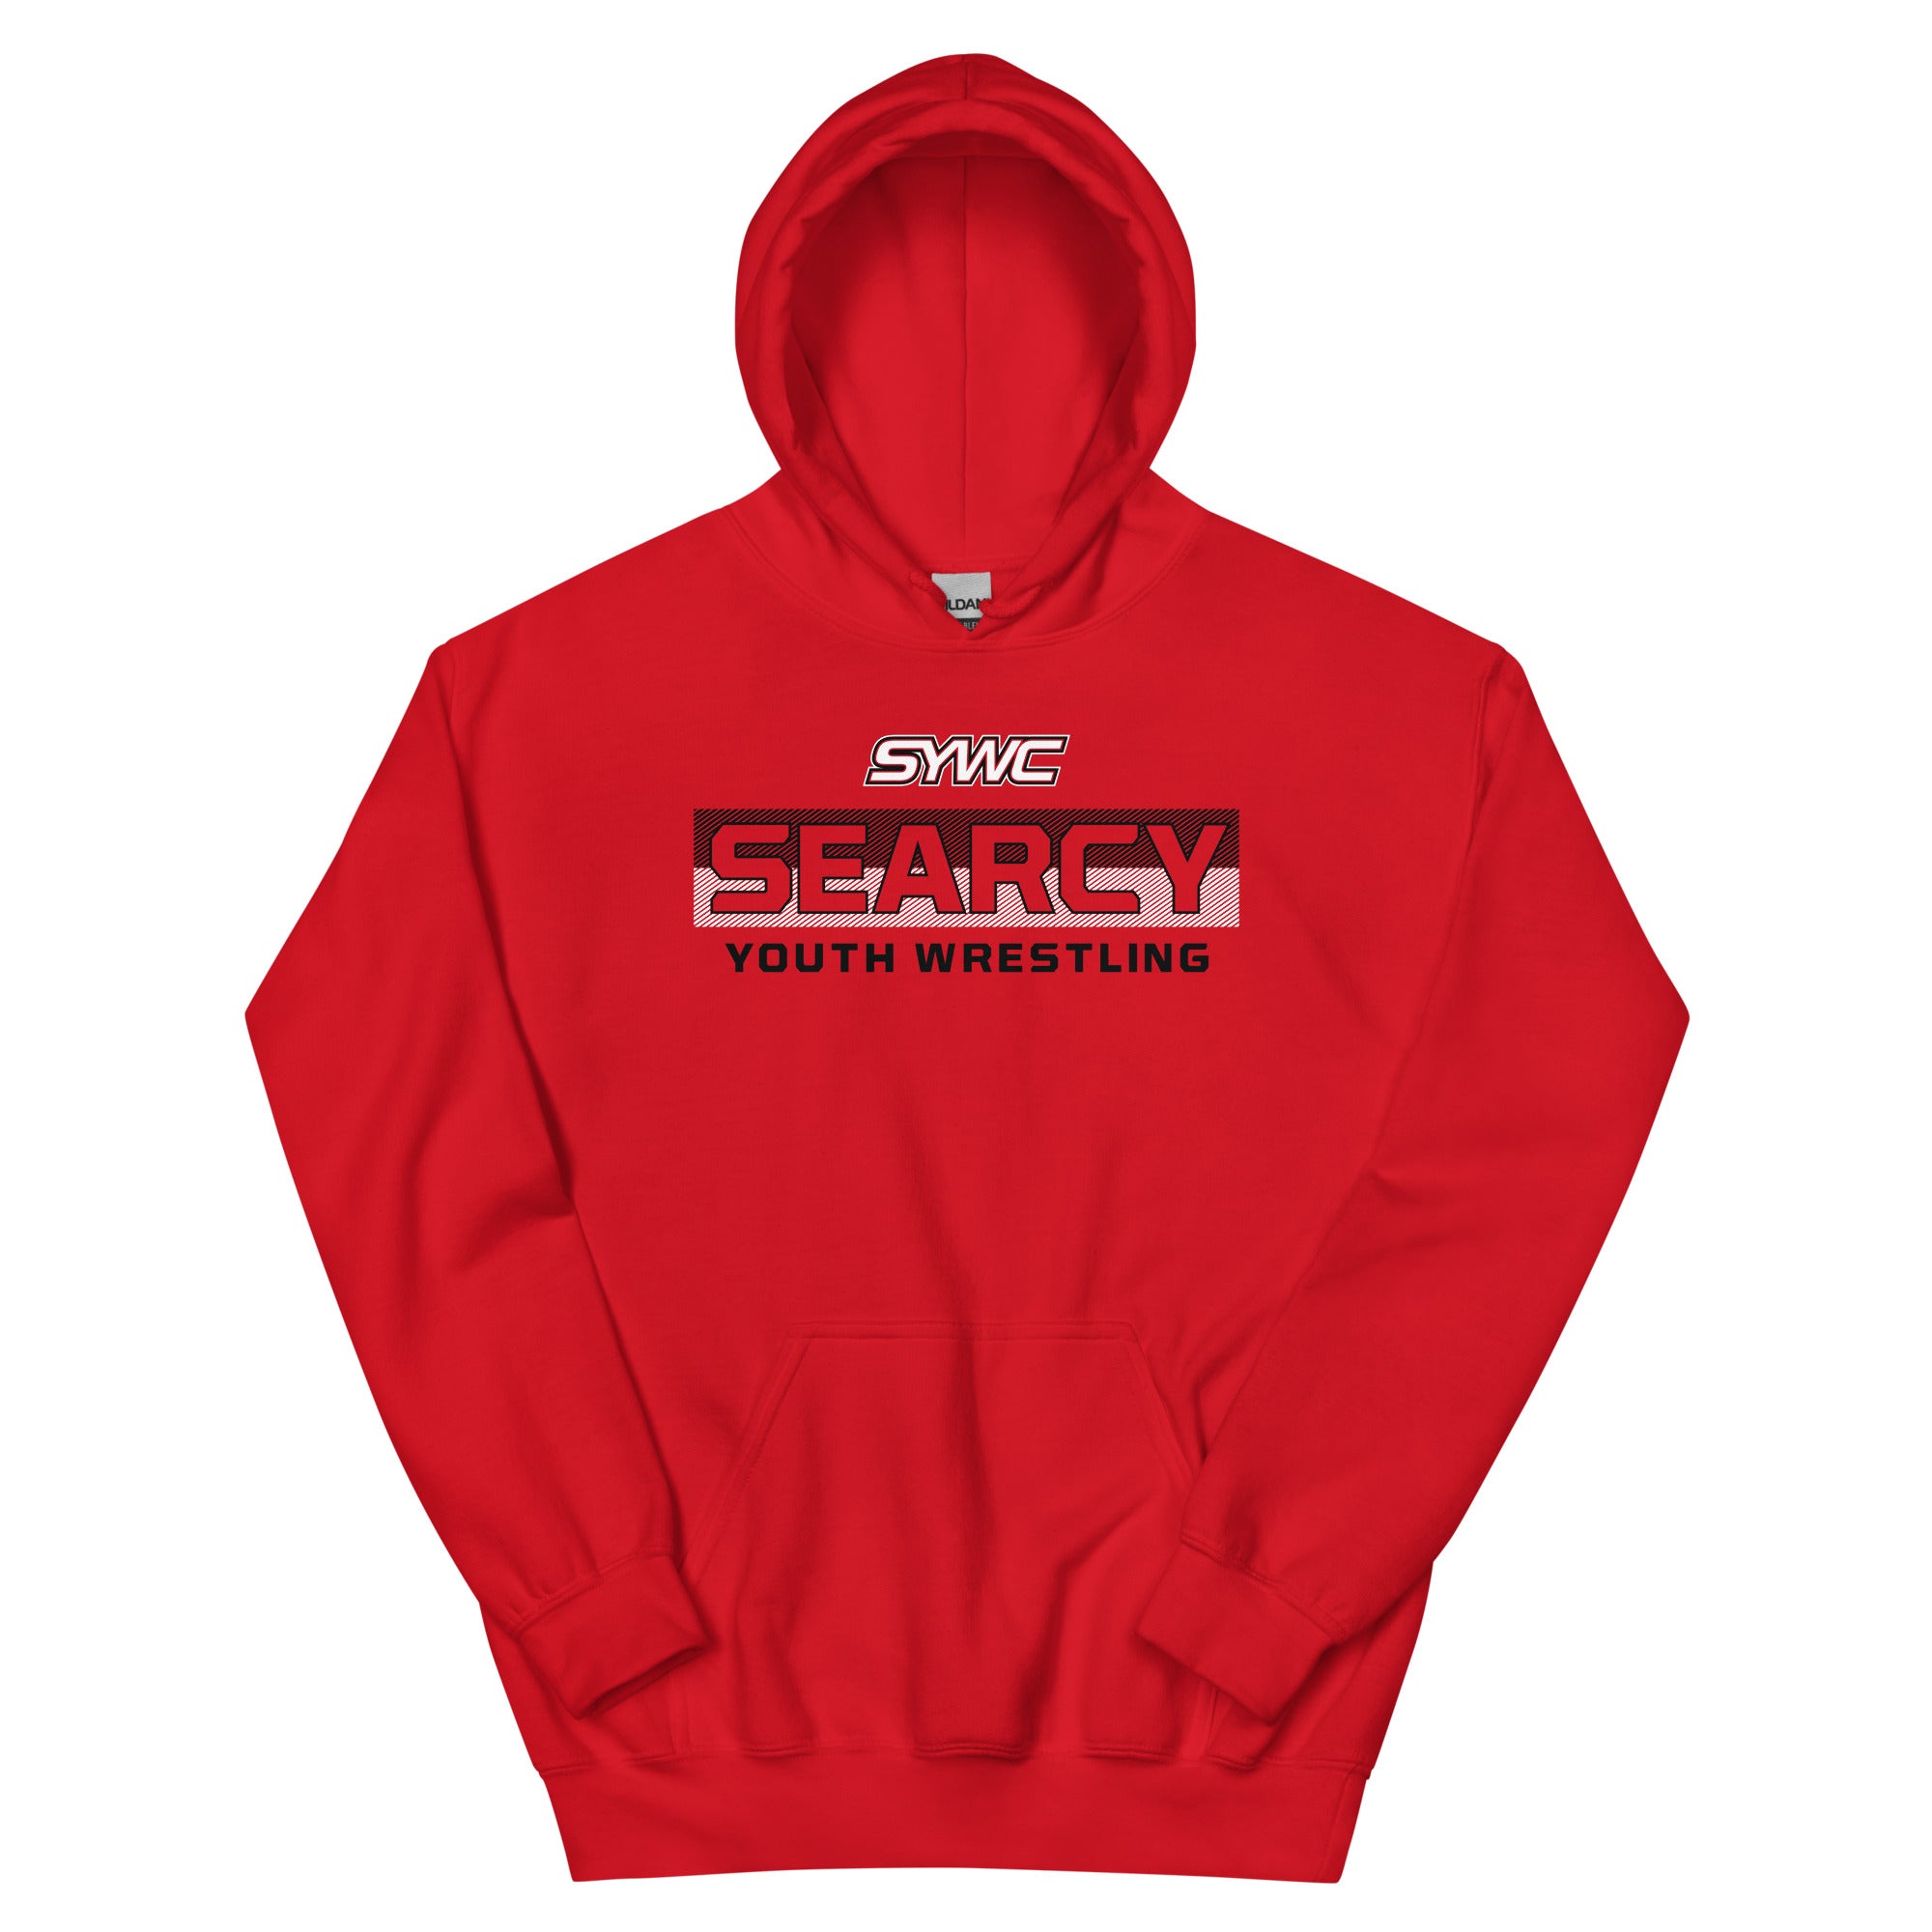 Searcy Youth Wrestling Unisex Heavy Blend Hoodie